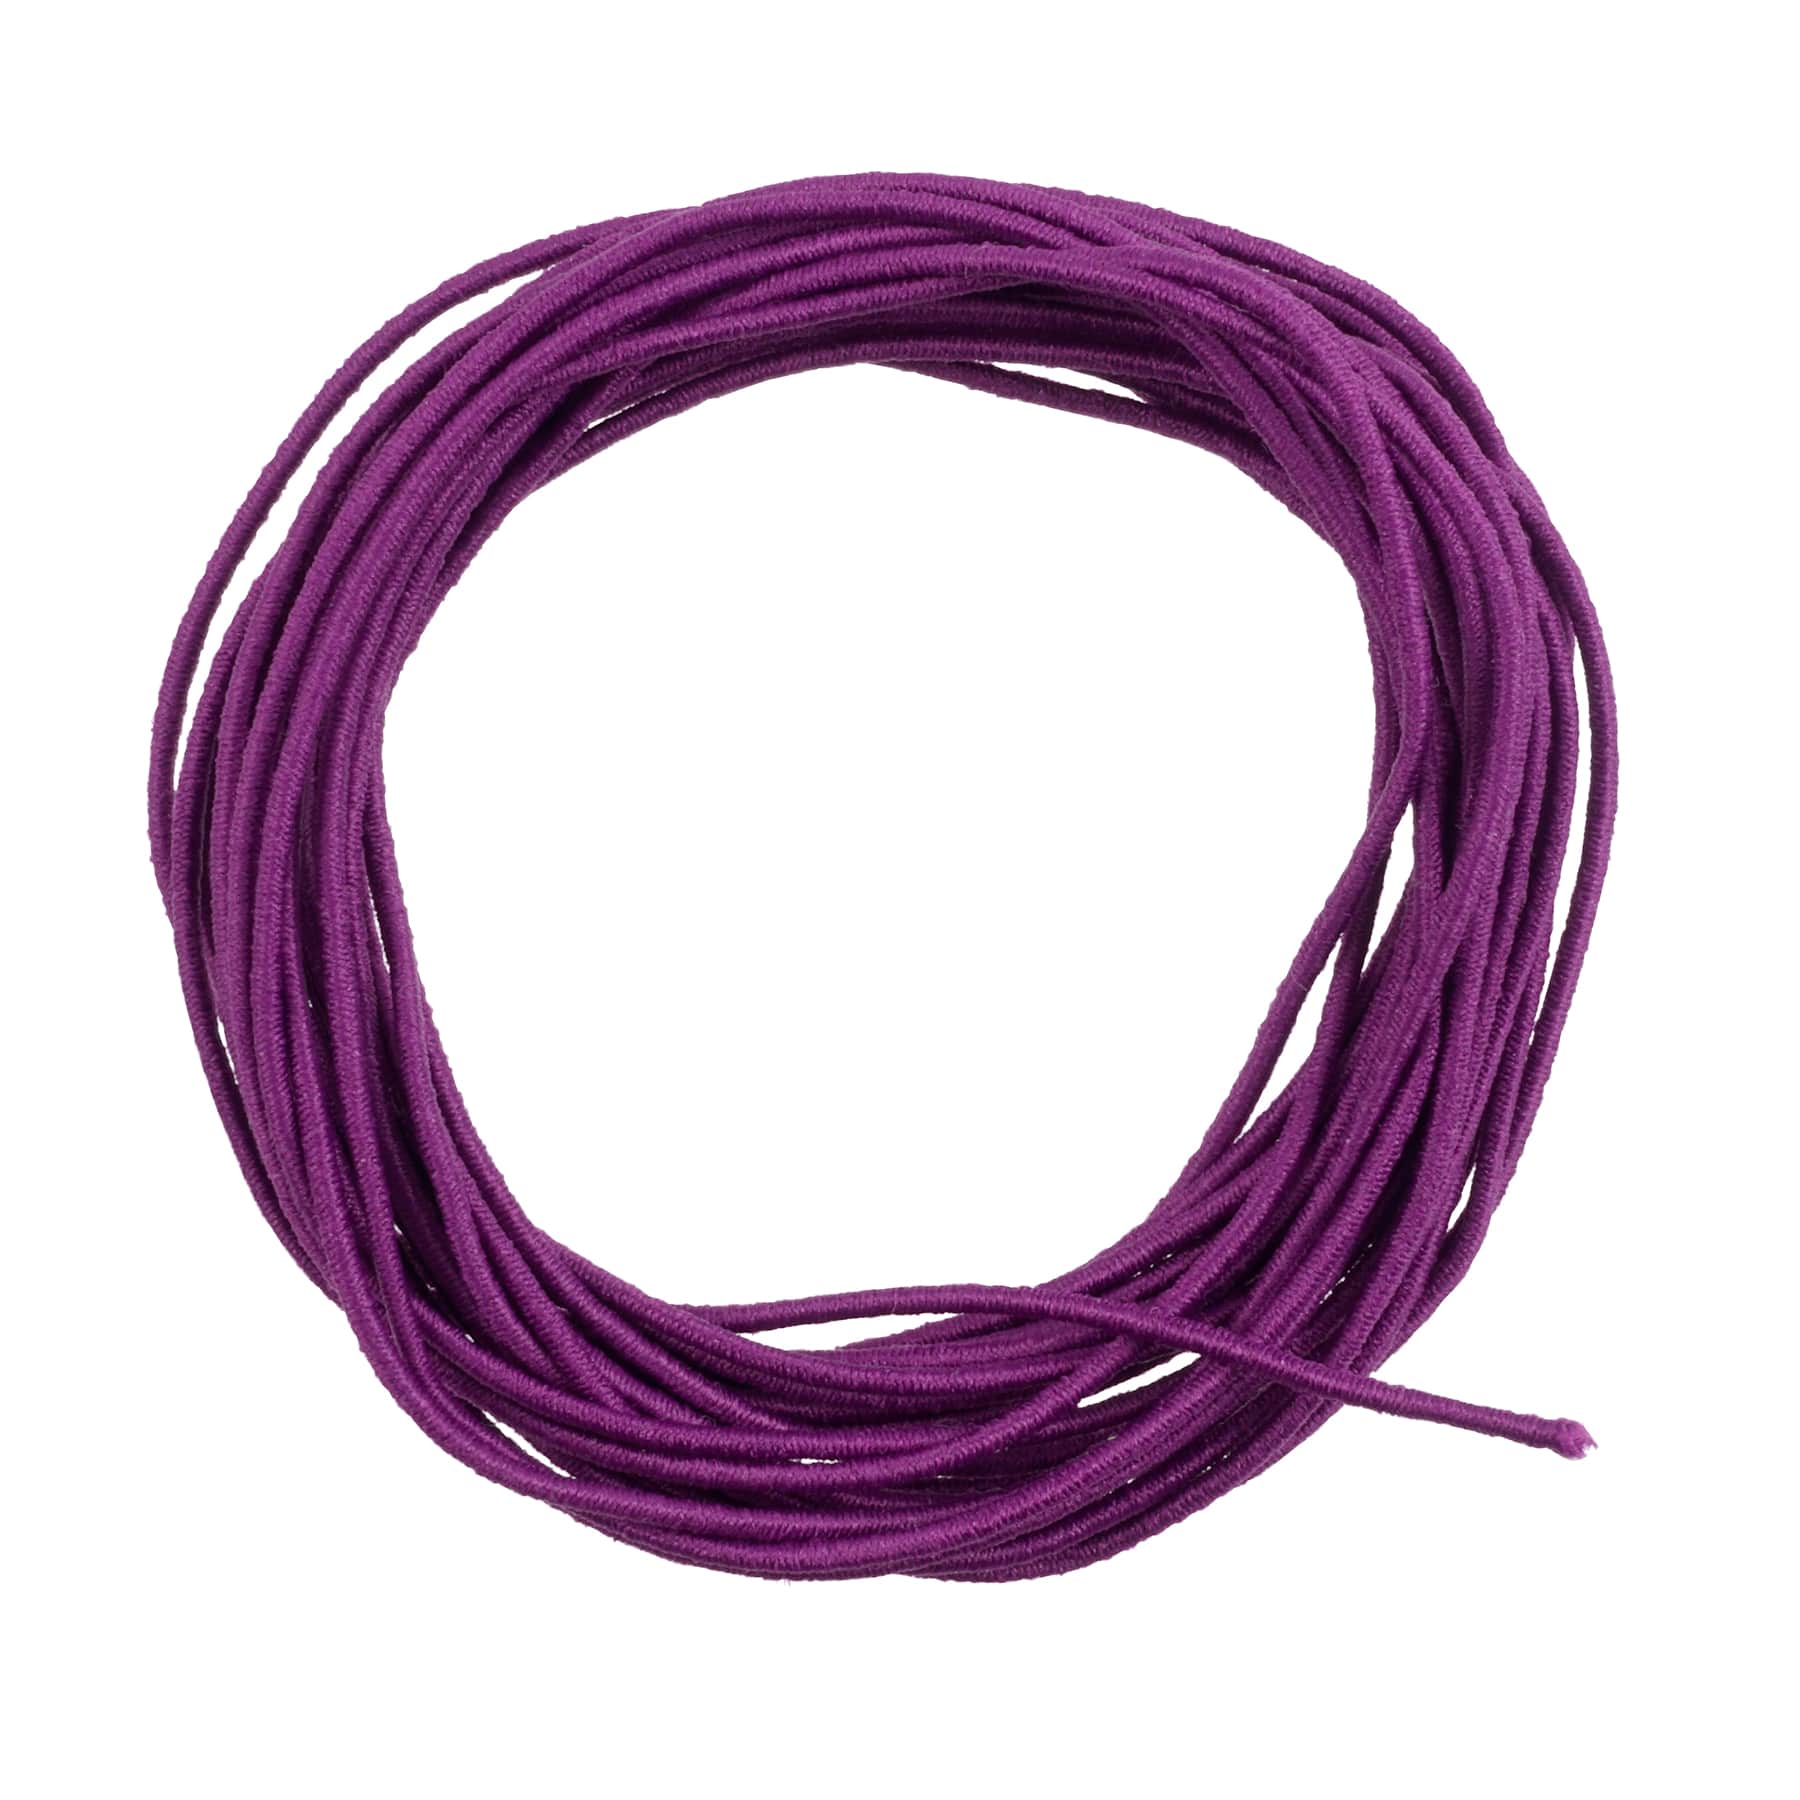 Creatology Stretch Cord - Hot Pink - Each